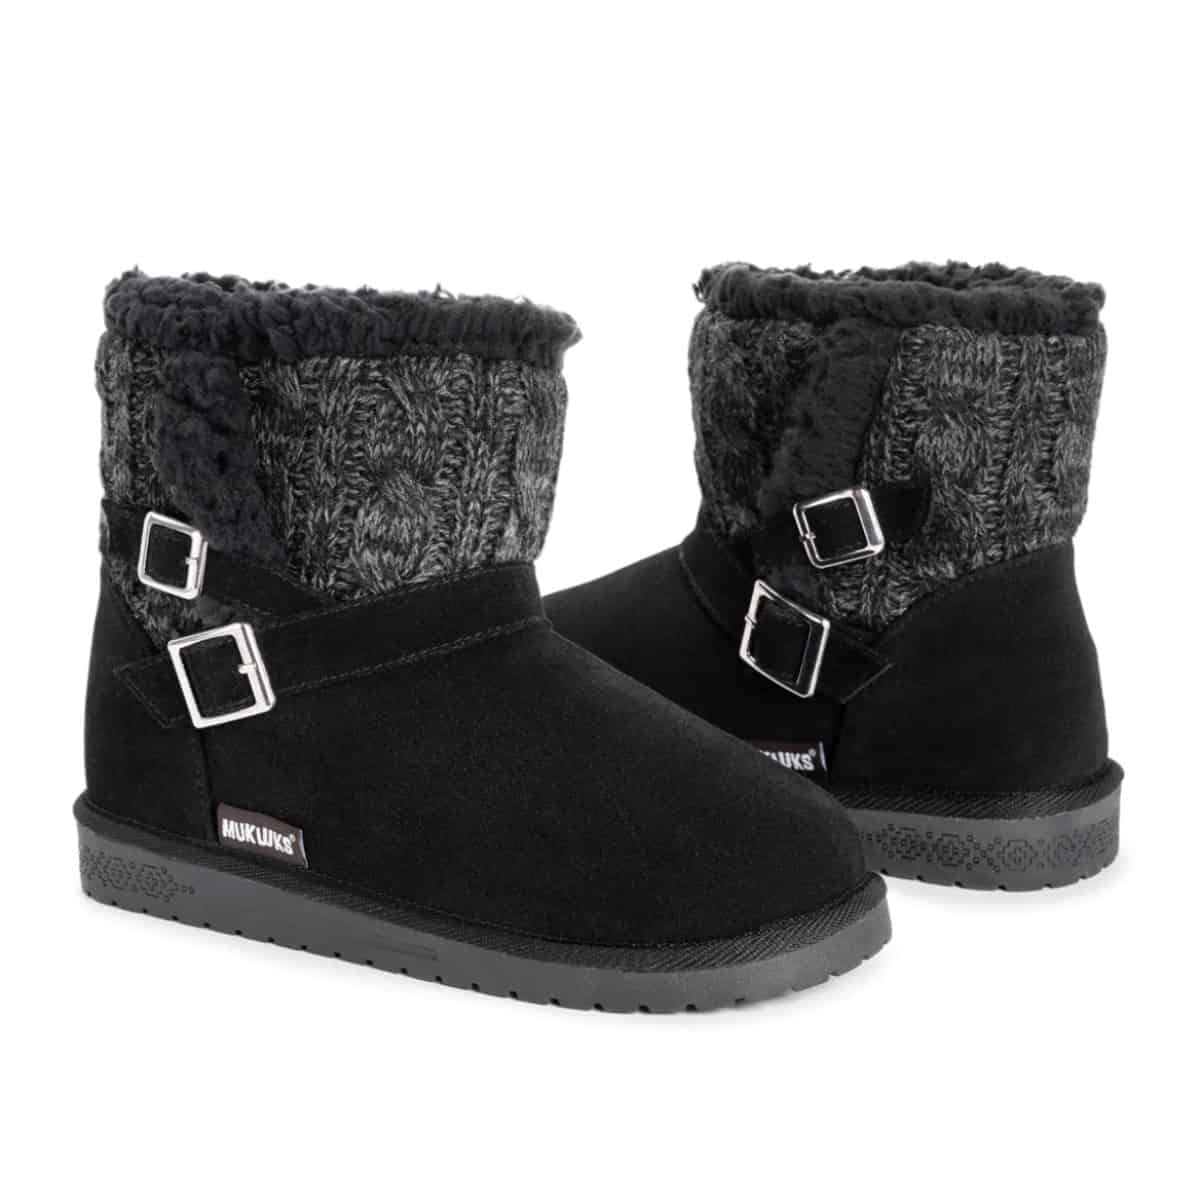 Black vegan Ugg boots from brand Muk Luks with buckles and faux suede and knit upper. 